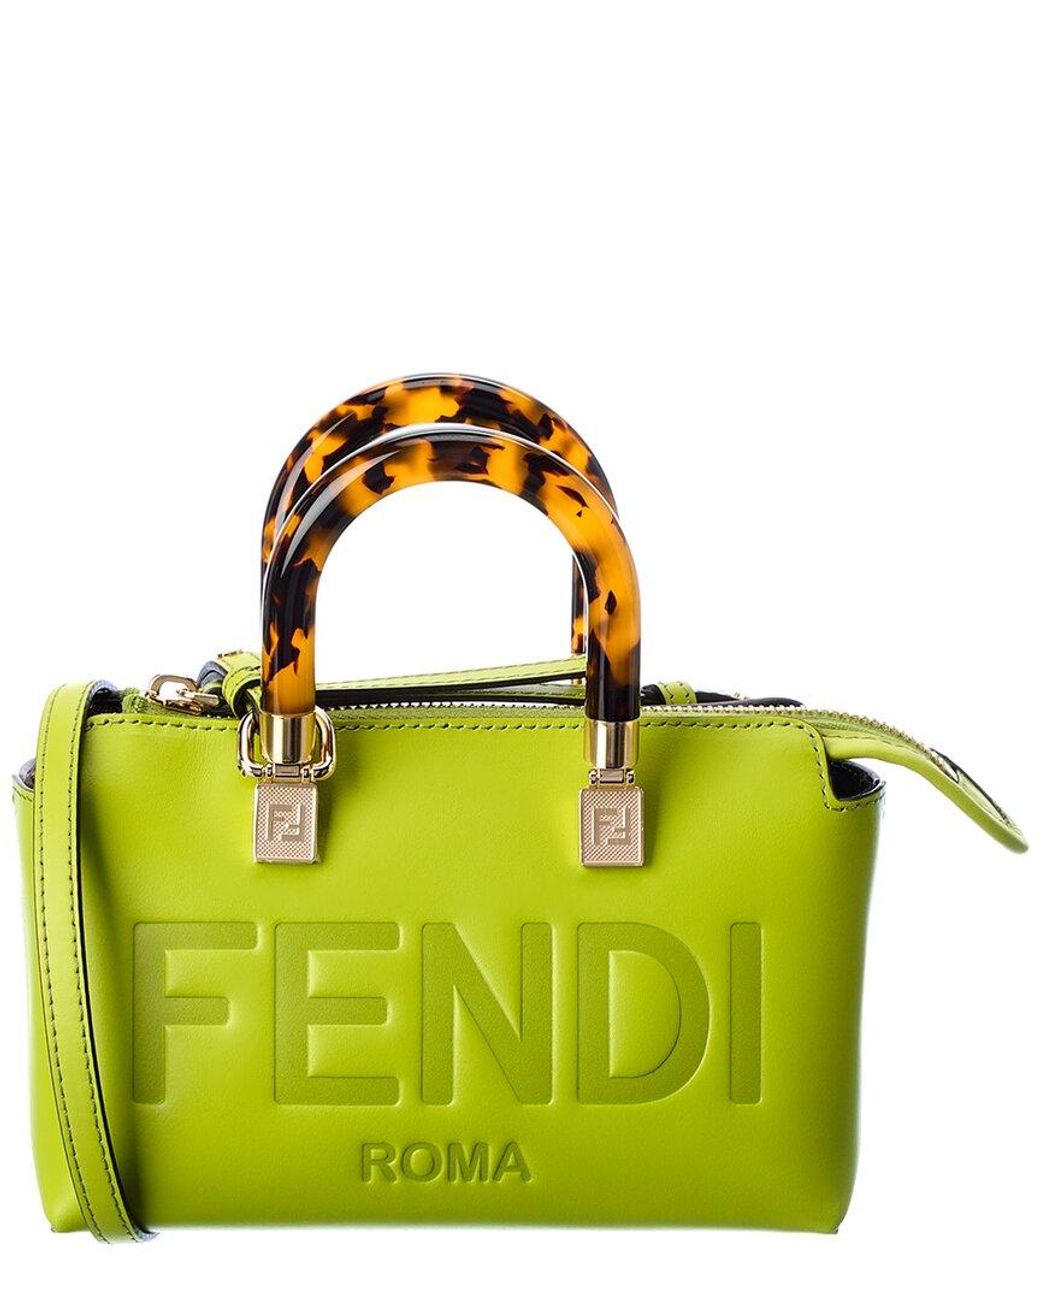 Fendi By The Way Mini Leather Shoulder Bag in Yellow | Lyst